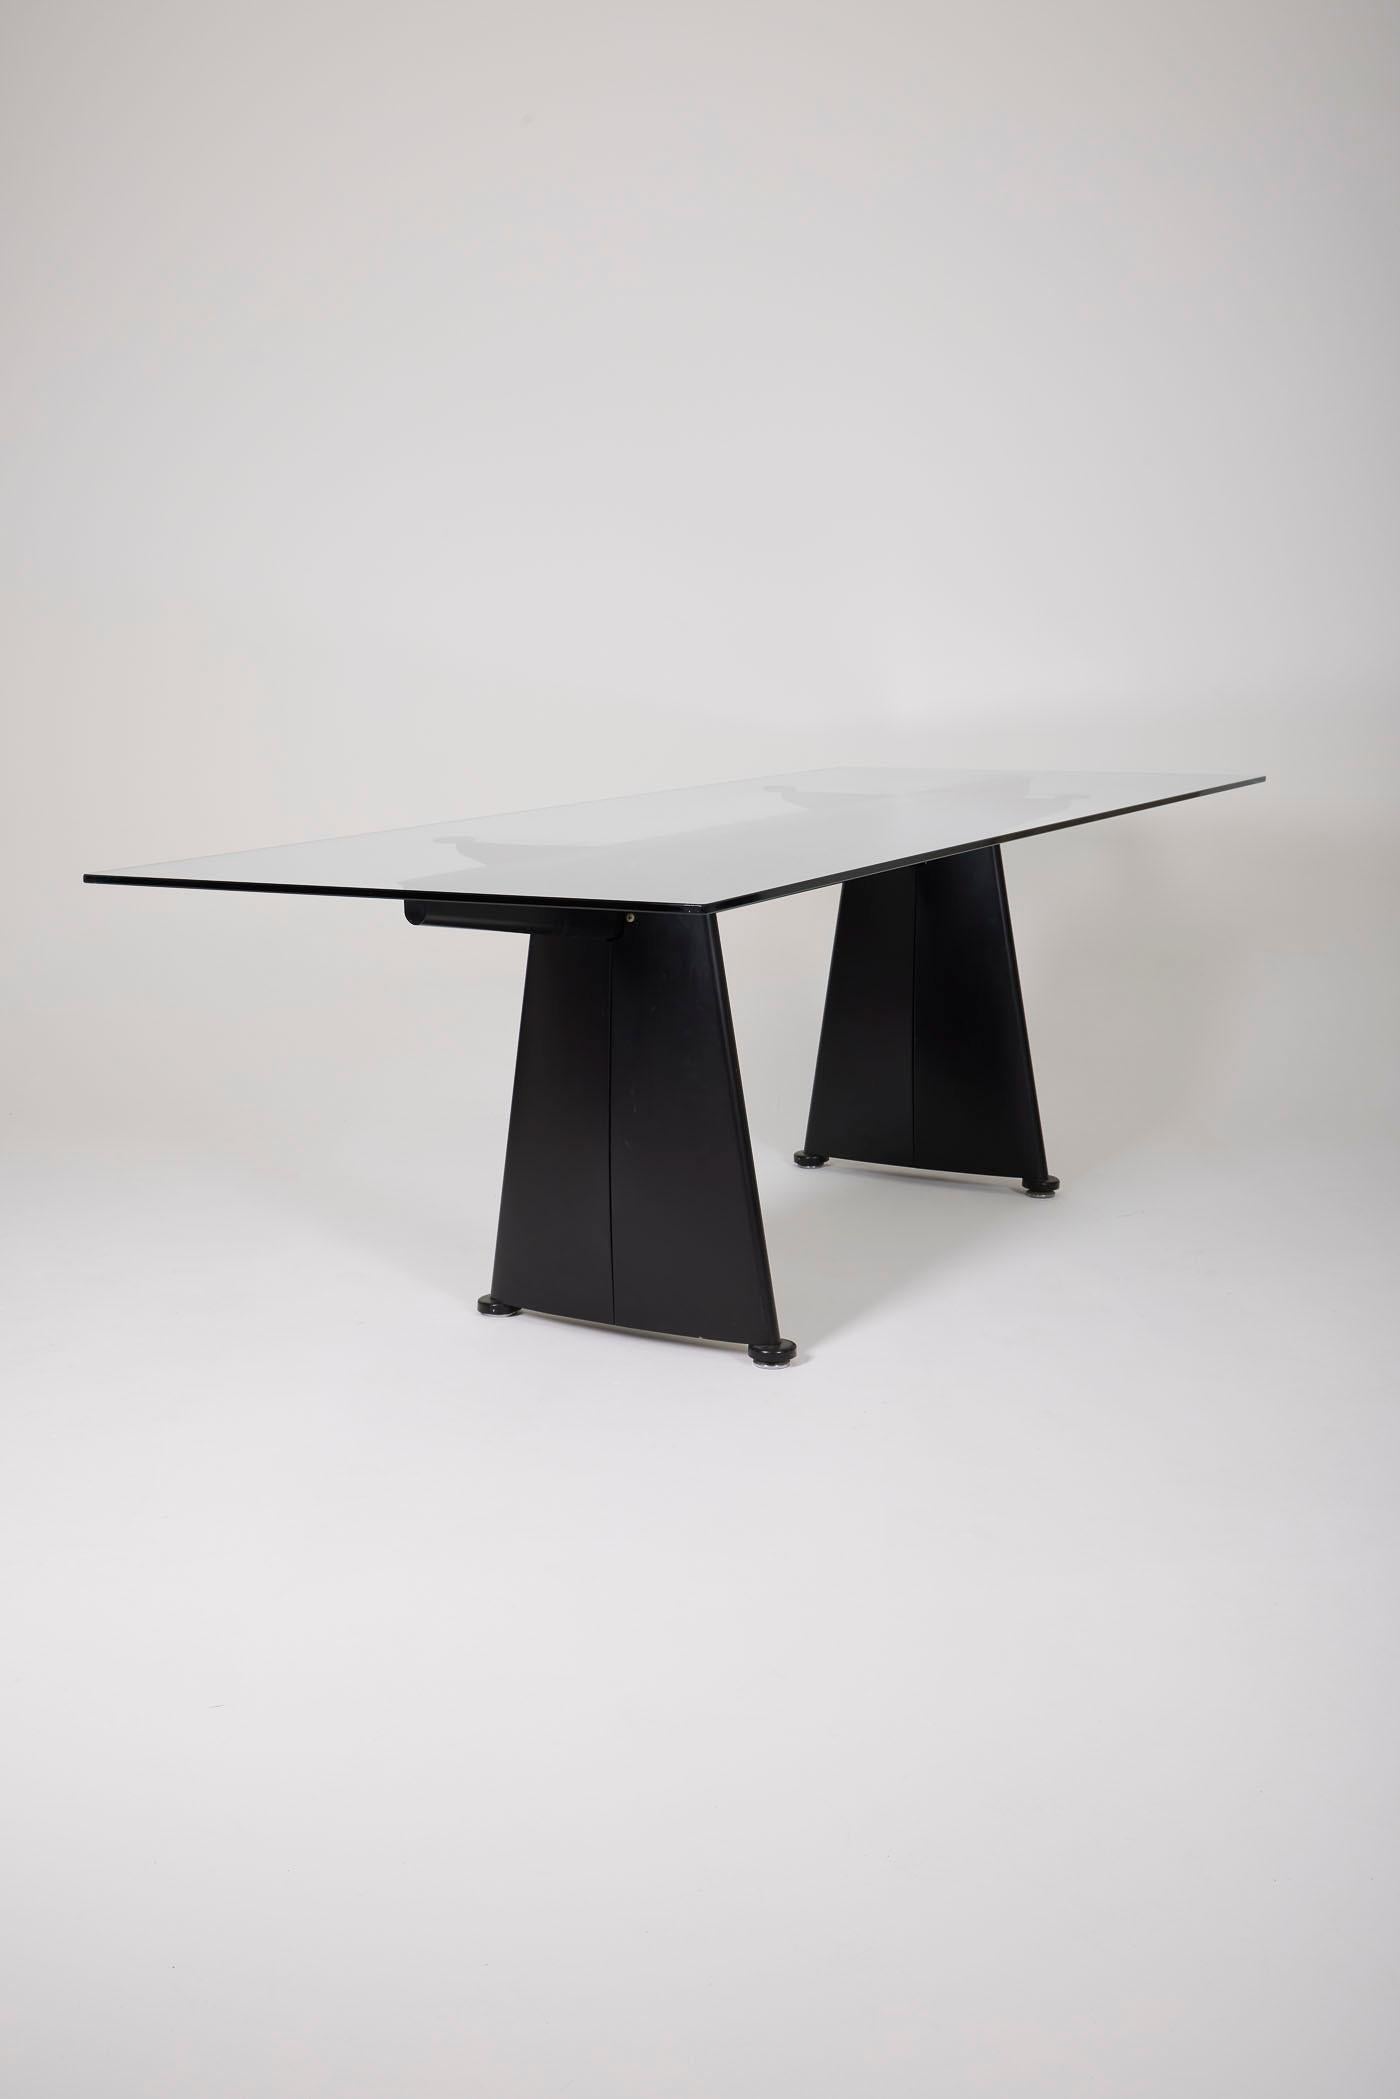 Large dining table by the famous designer Jean Prouvé (1901-1984) for Tecta in the 1980s (1986). Frosted glass top and black metal structure. Very good condition.
DV142